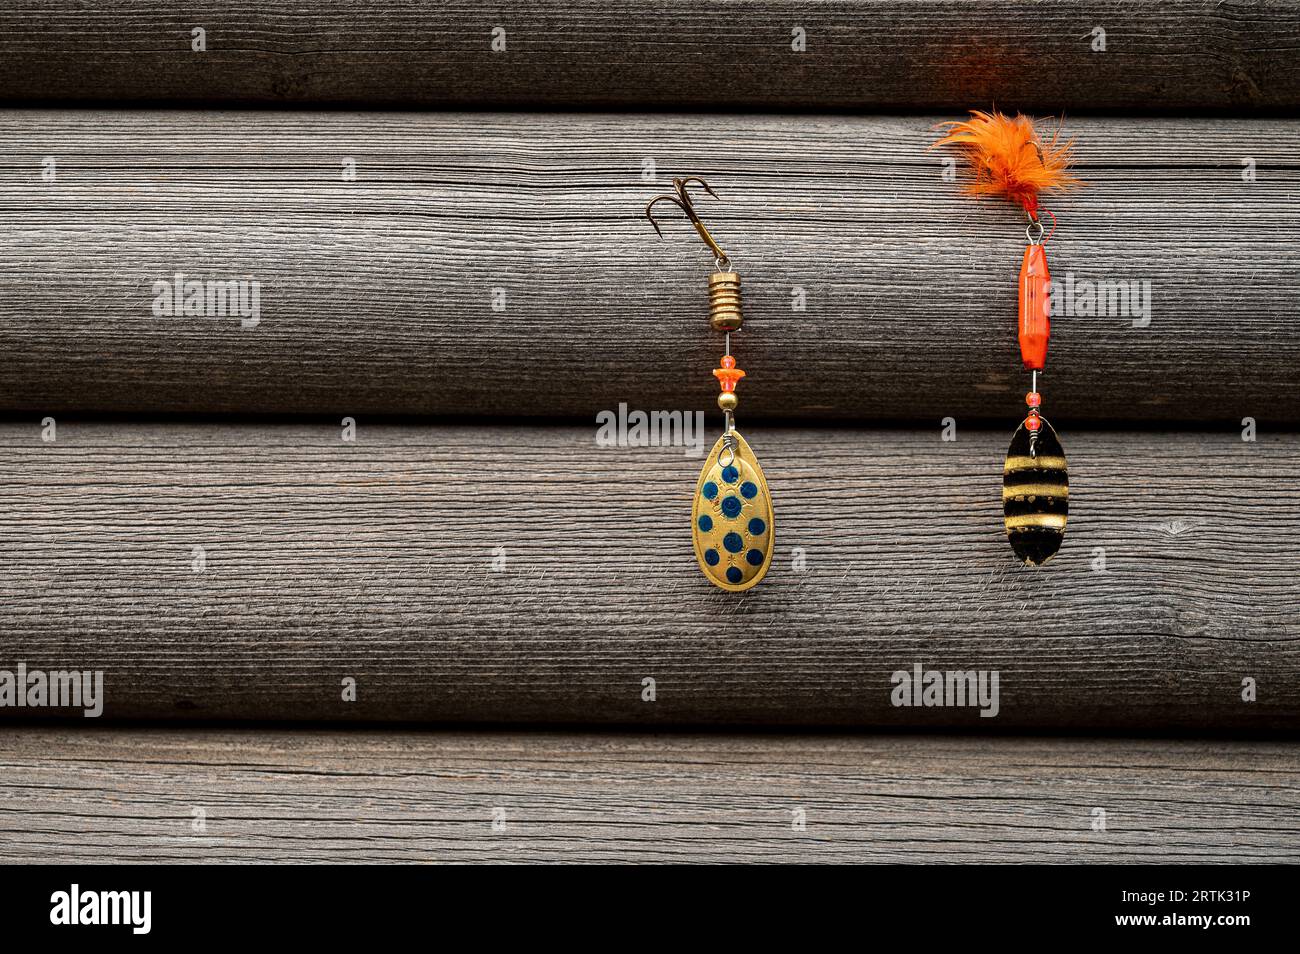 two red fishing lures hanging on a grey wooden wall Stock Photo